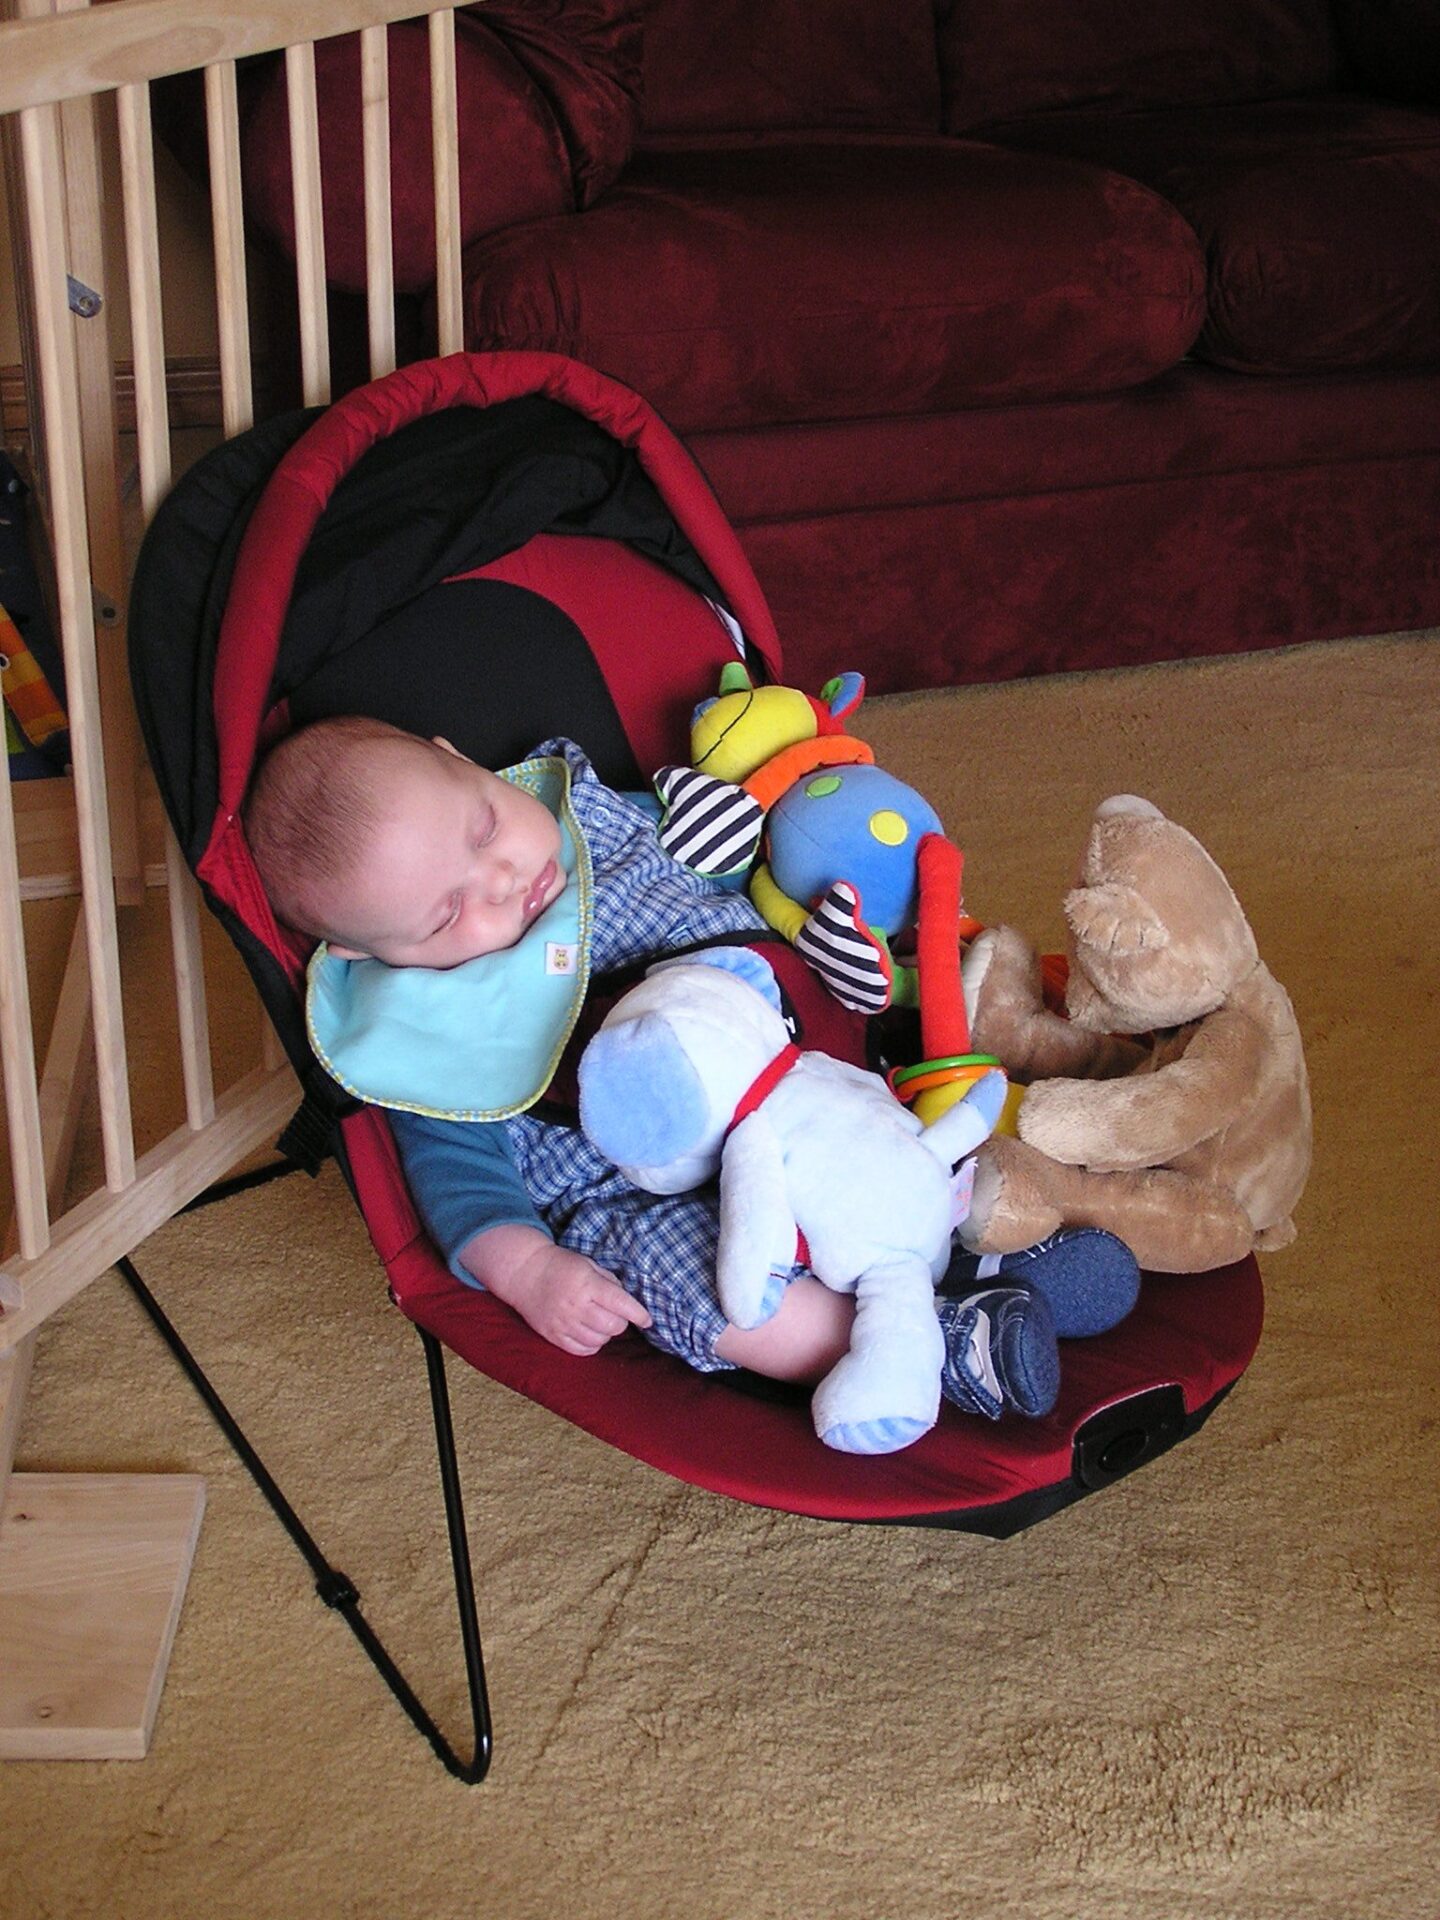 Reflux in babies; Sleeping upright seemed to help a lot